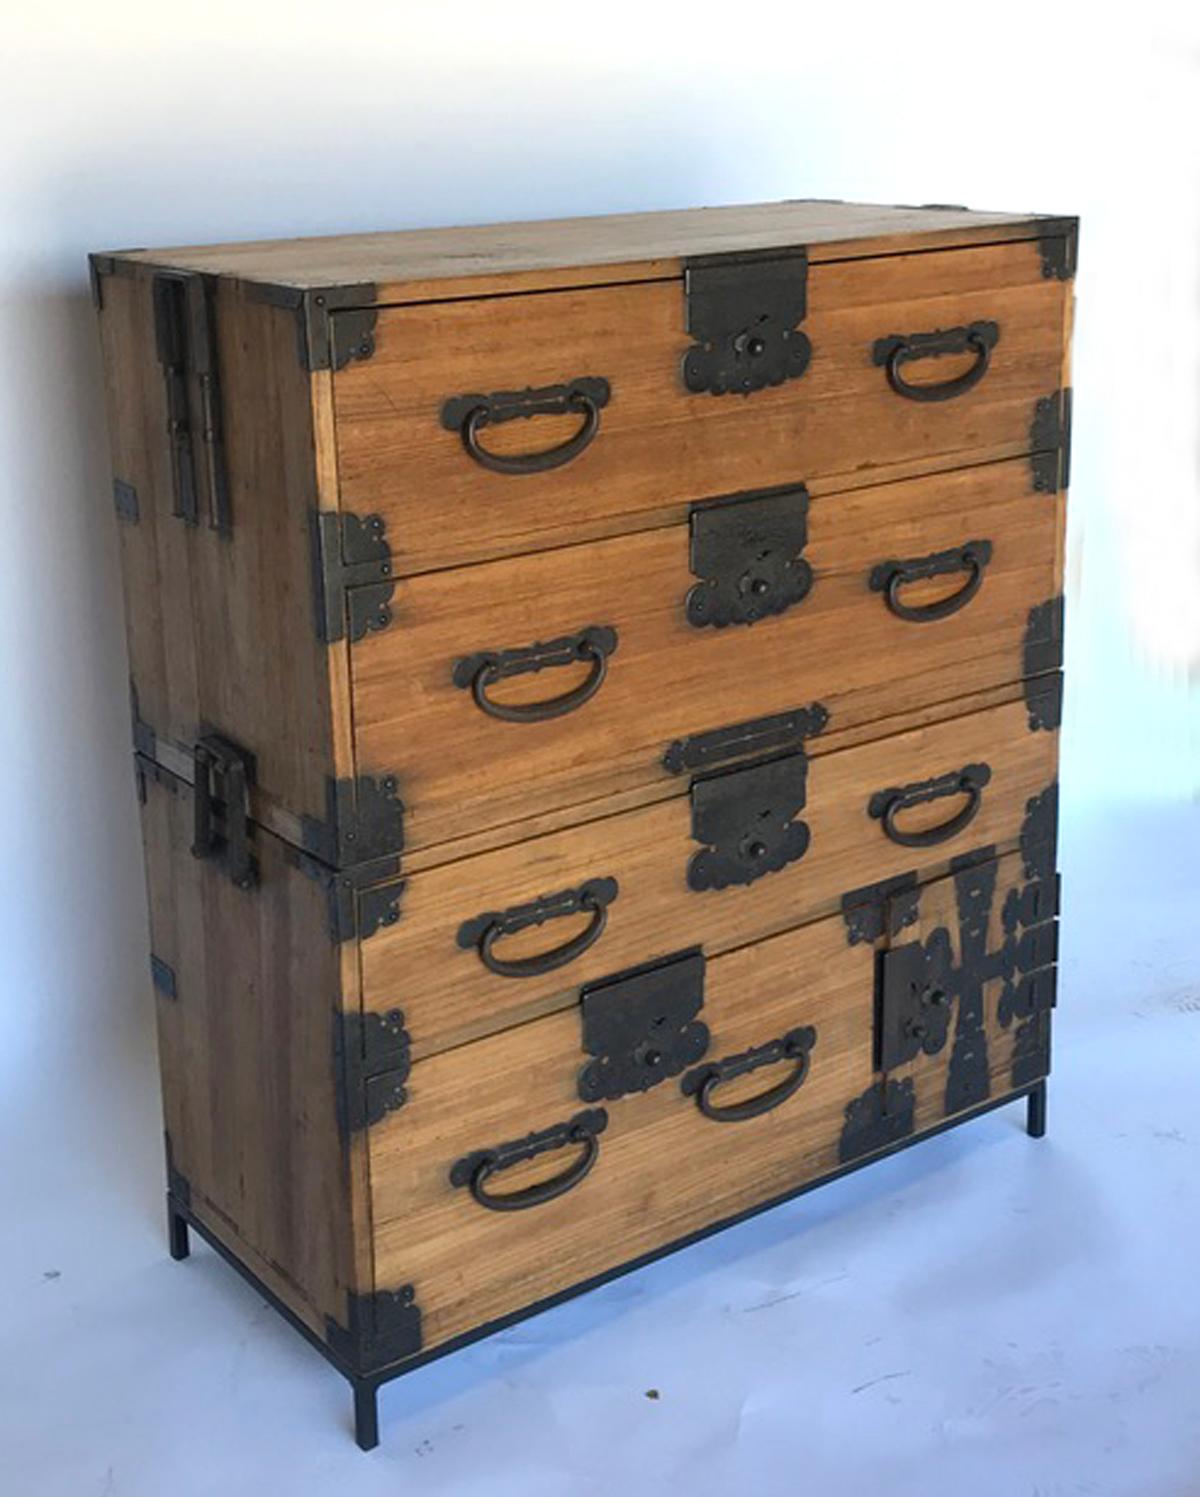 Very functional, hinoki wood Japanese tansu on custom iron base. This tansu has four drawers and one small compartment with two small drawers. All original. Works as a chest of drawers or can be separated and used as nightstands or side tables.